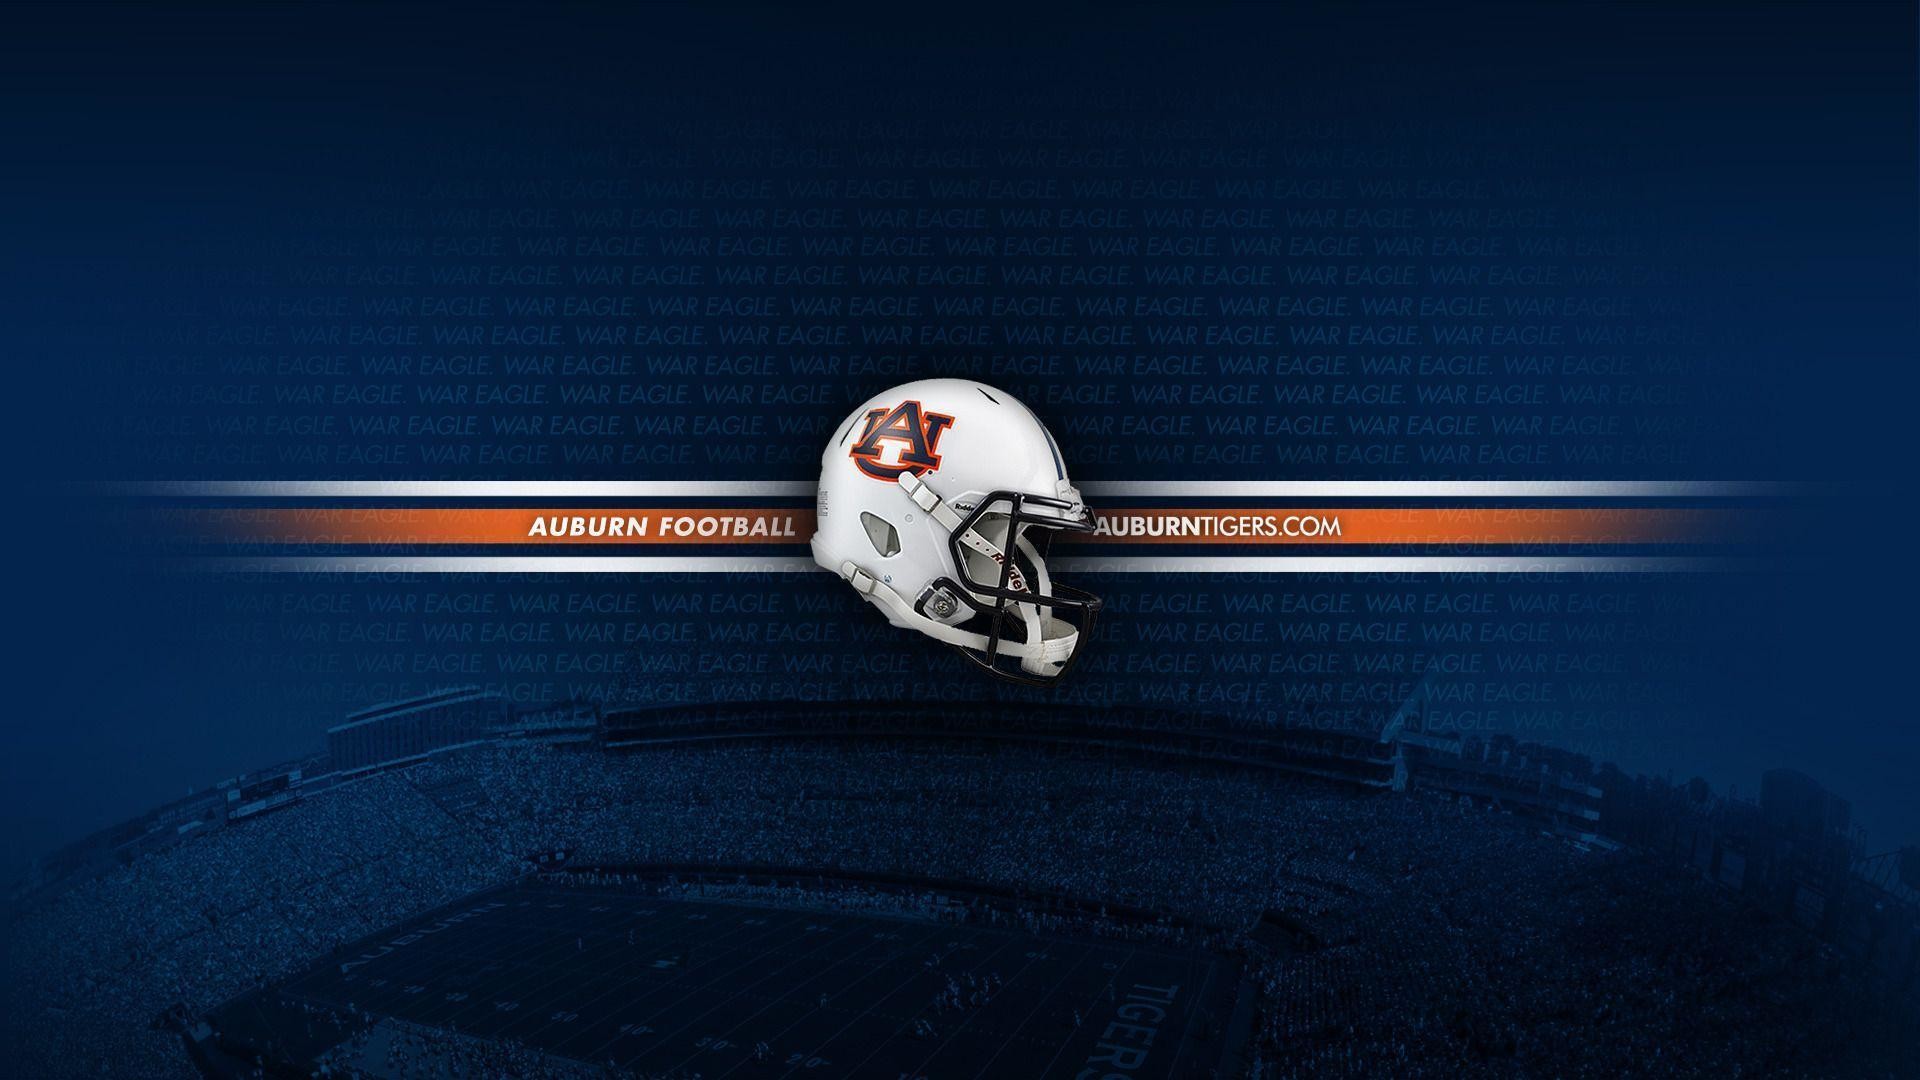 1920x1080 Auburn Tigers Wallpapers, Browser Themes & Other Downloads - Brand .